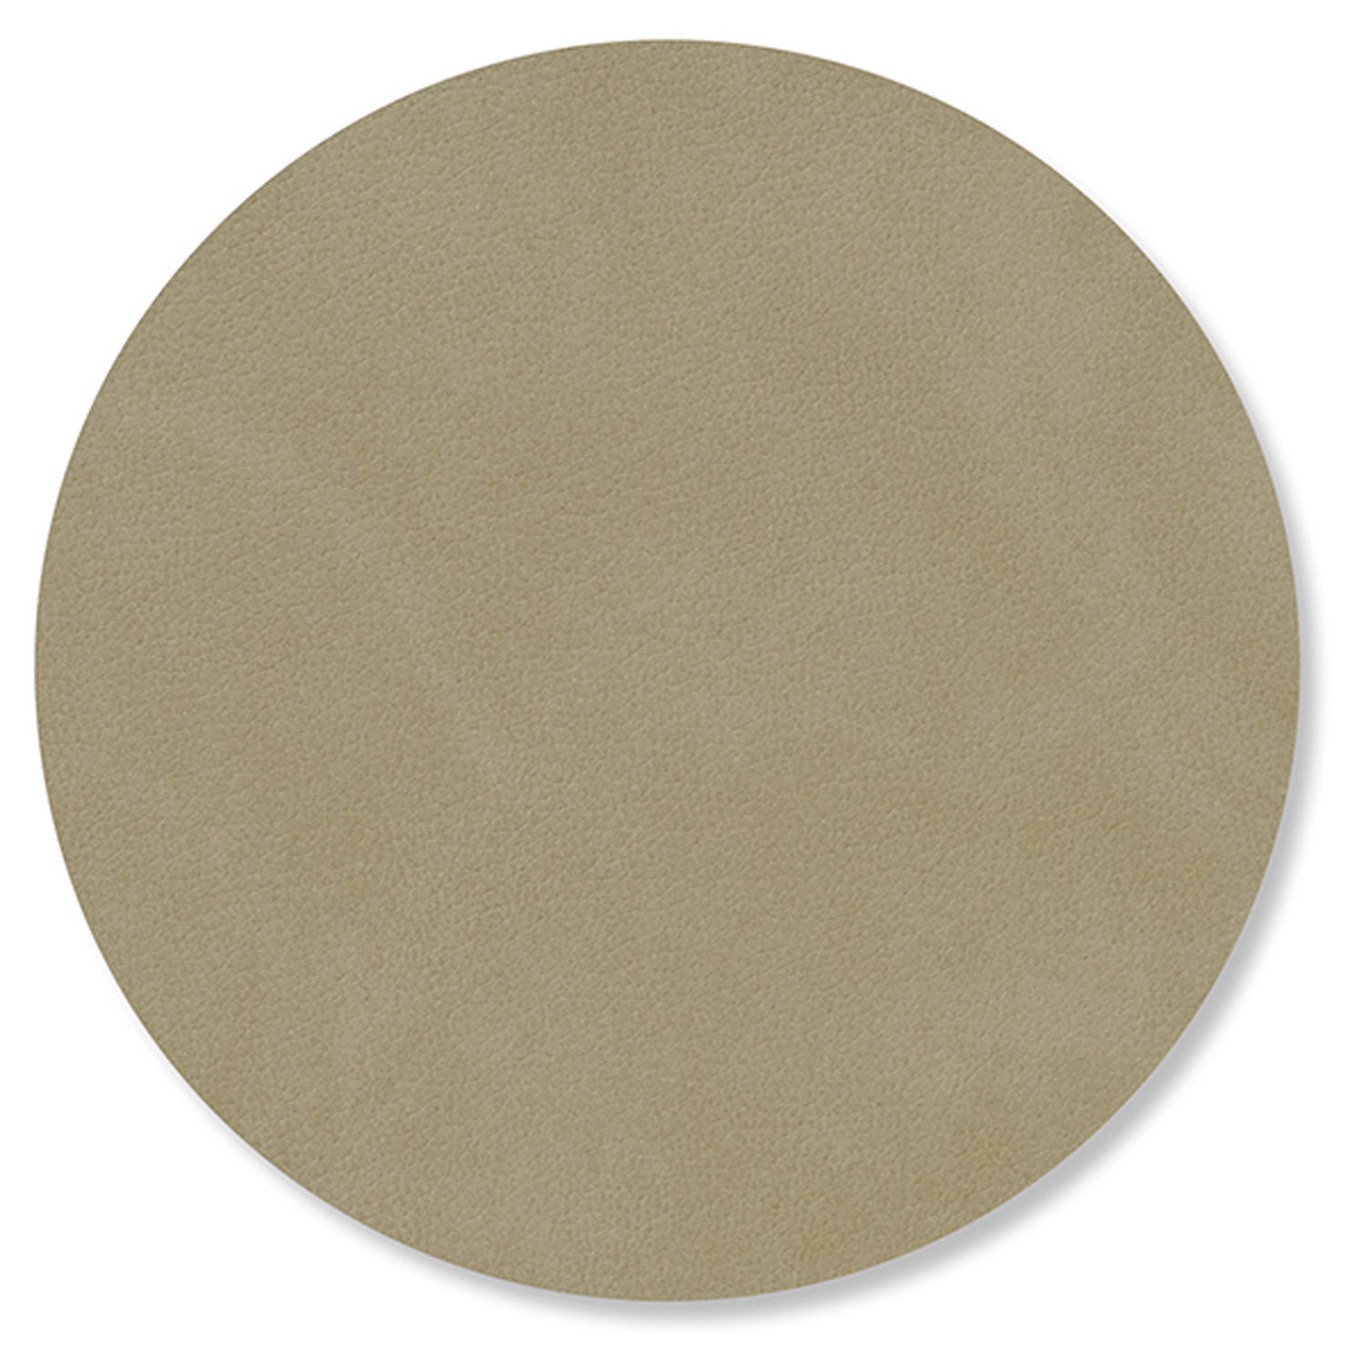 Circle Glass Coaster Nupo 10 cm, Herbal Dust